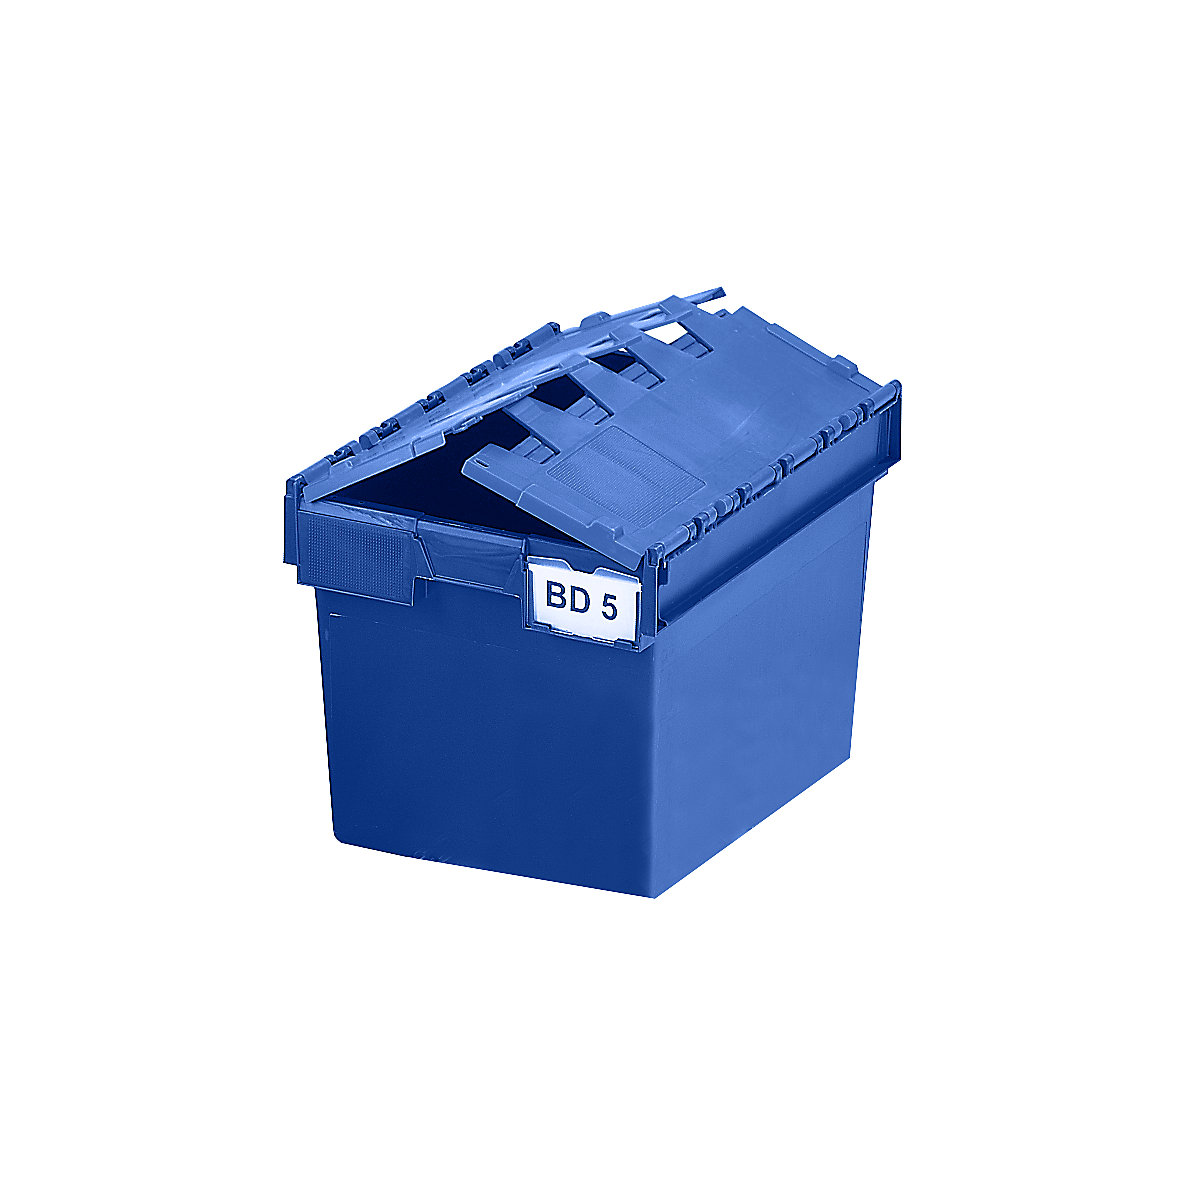 KAIMAN reusable stacking container, capacity 64 litres, LxWxH 600 x 400 x 365 mm, blue